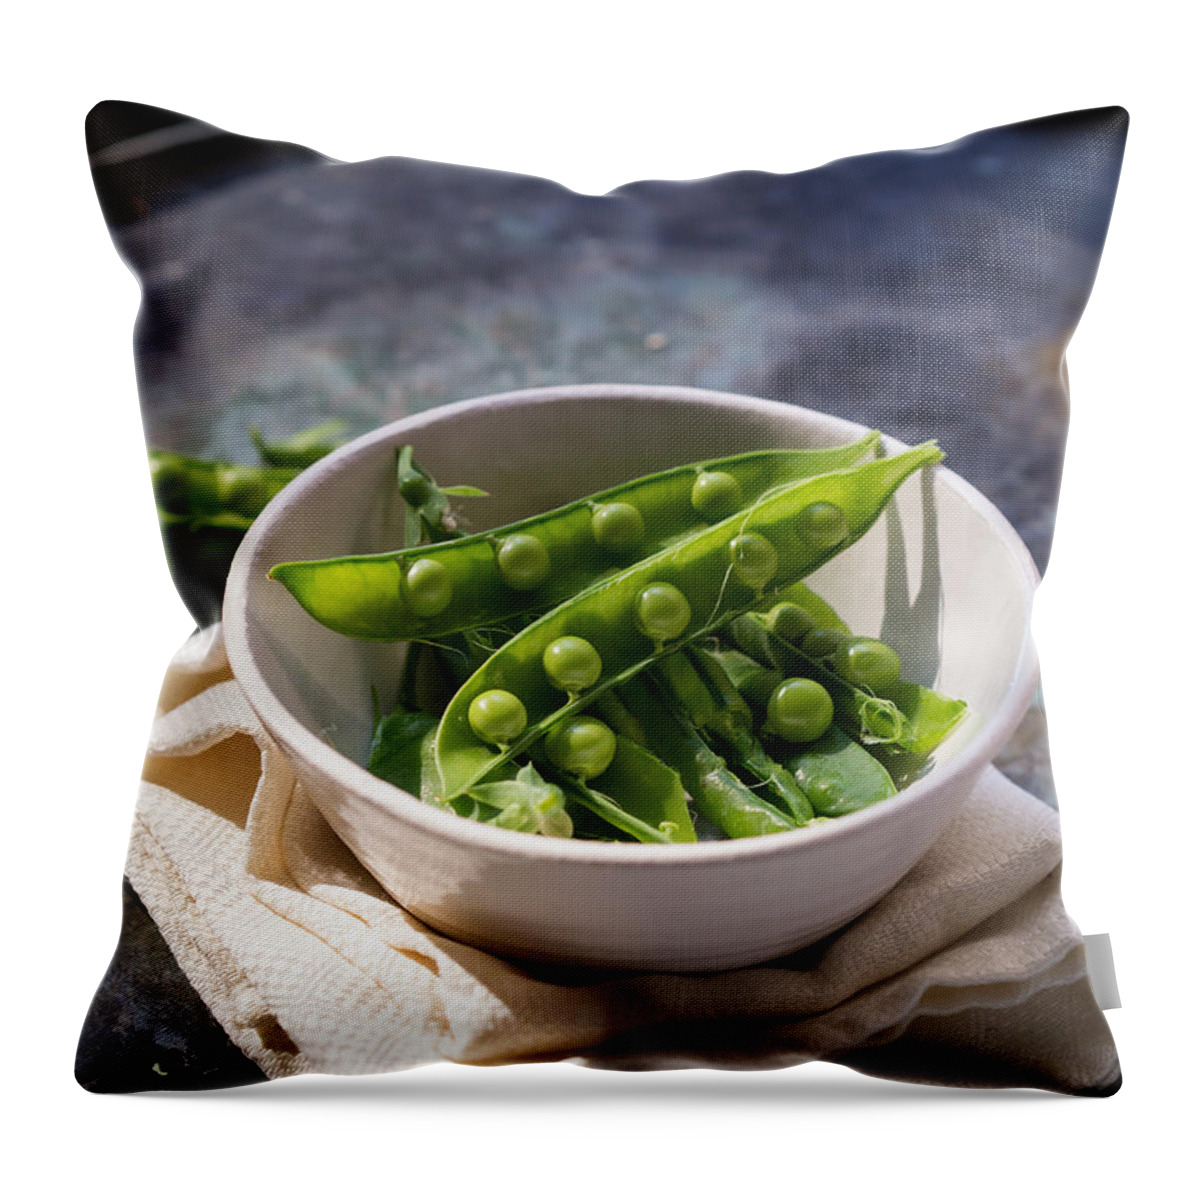 Vegetables Veggies Fresh Garden Picked Throw Pillow featuring the photograph Fresh Peapods by Edward Fielding